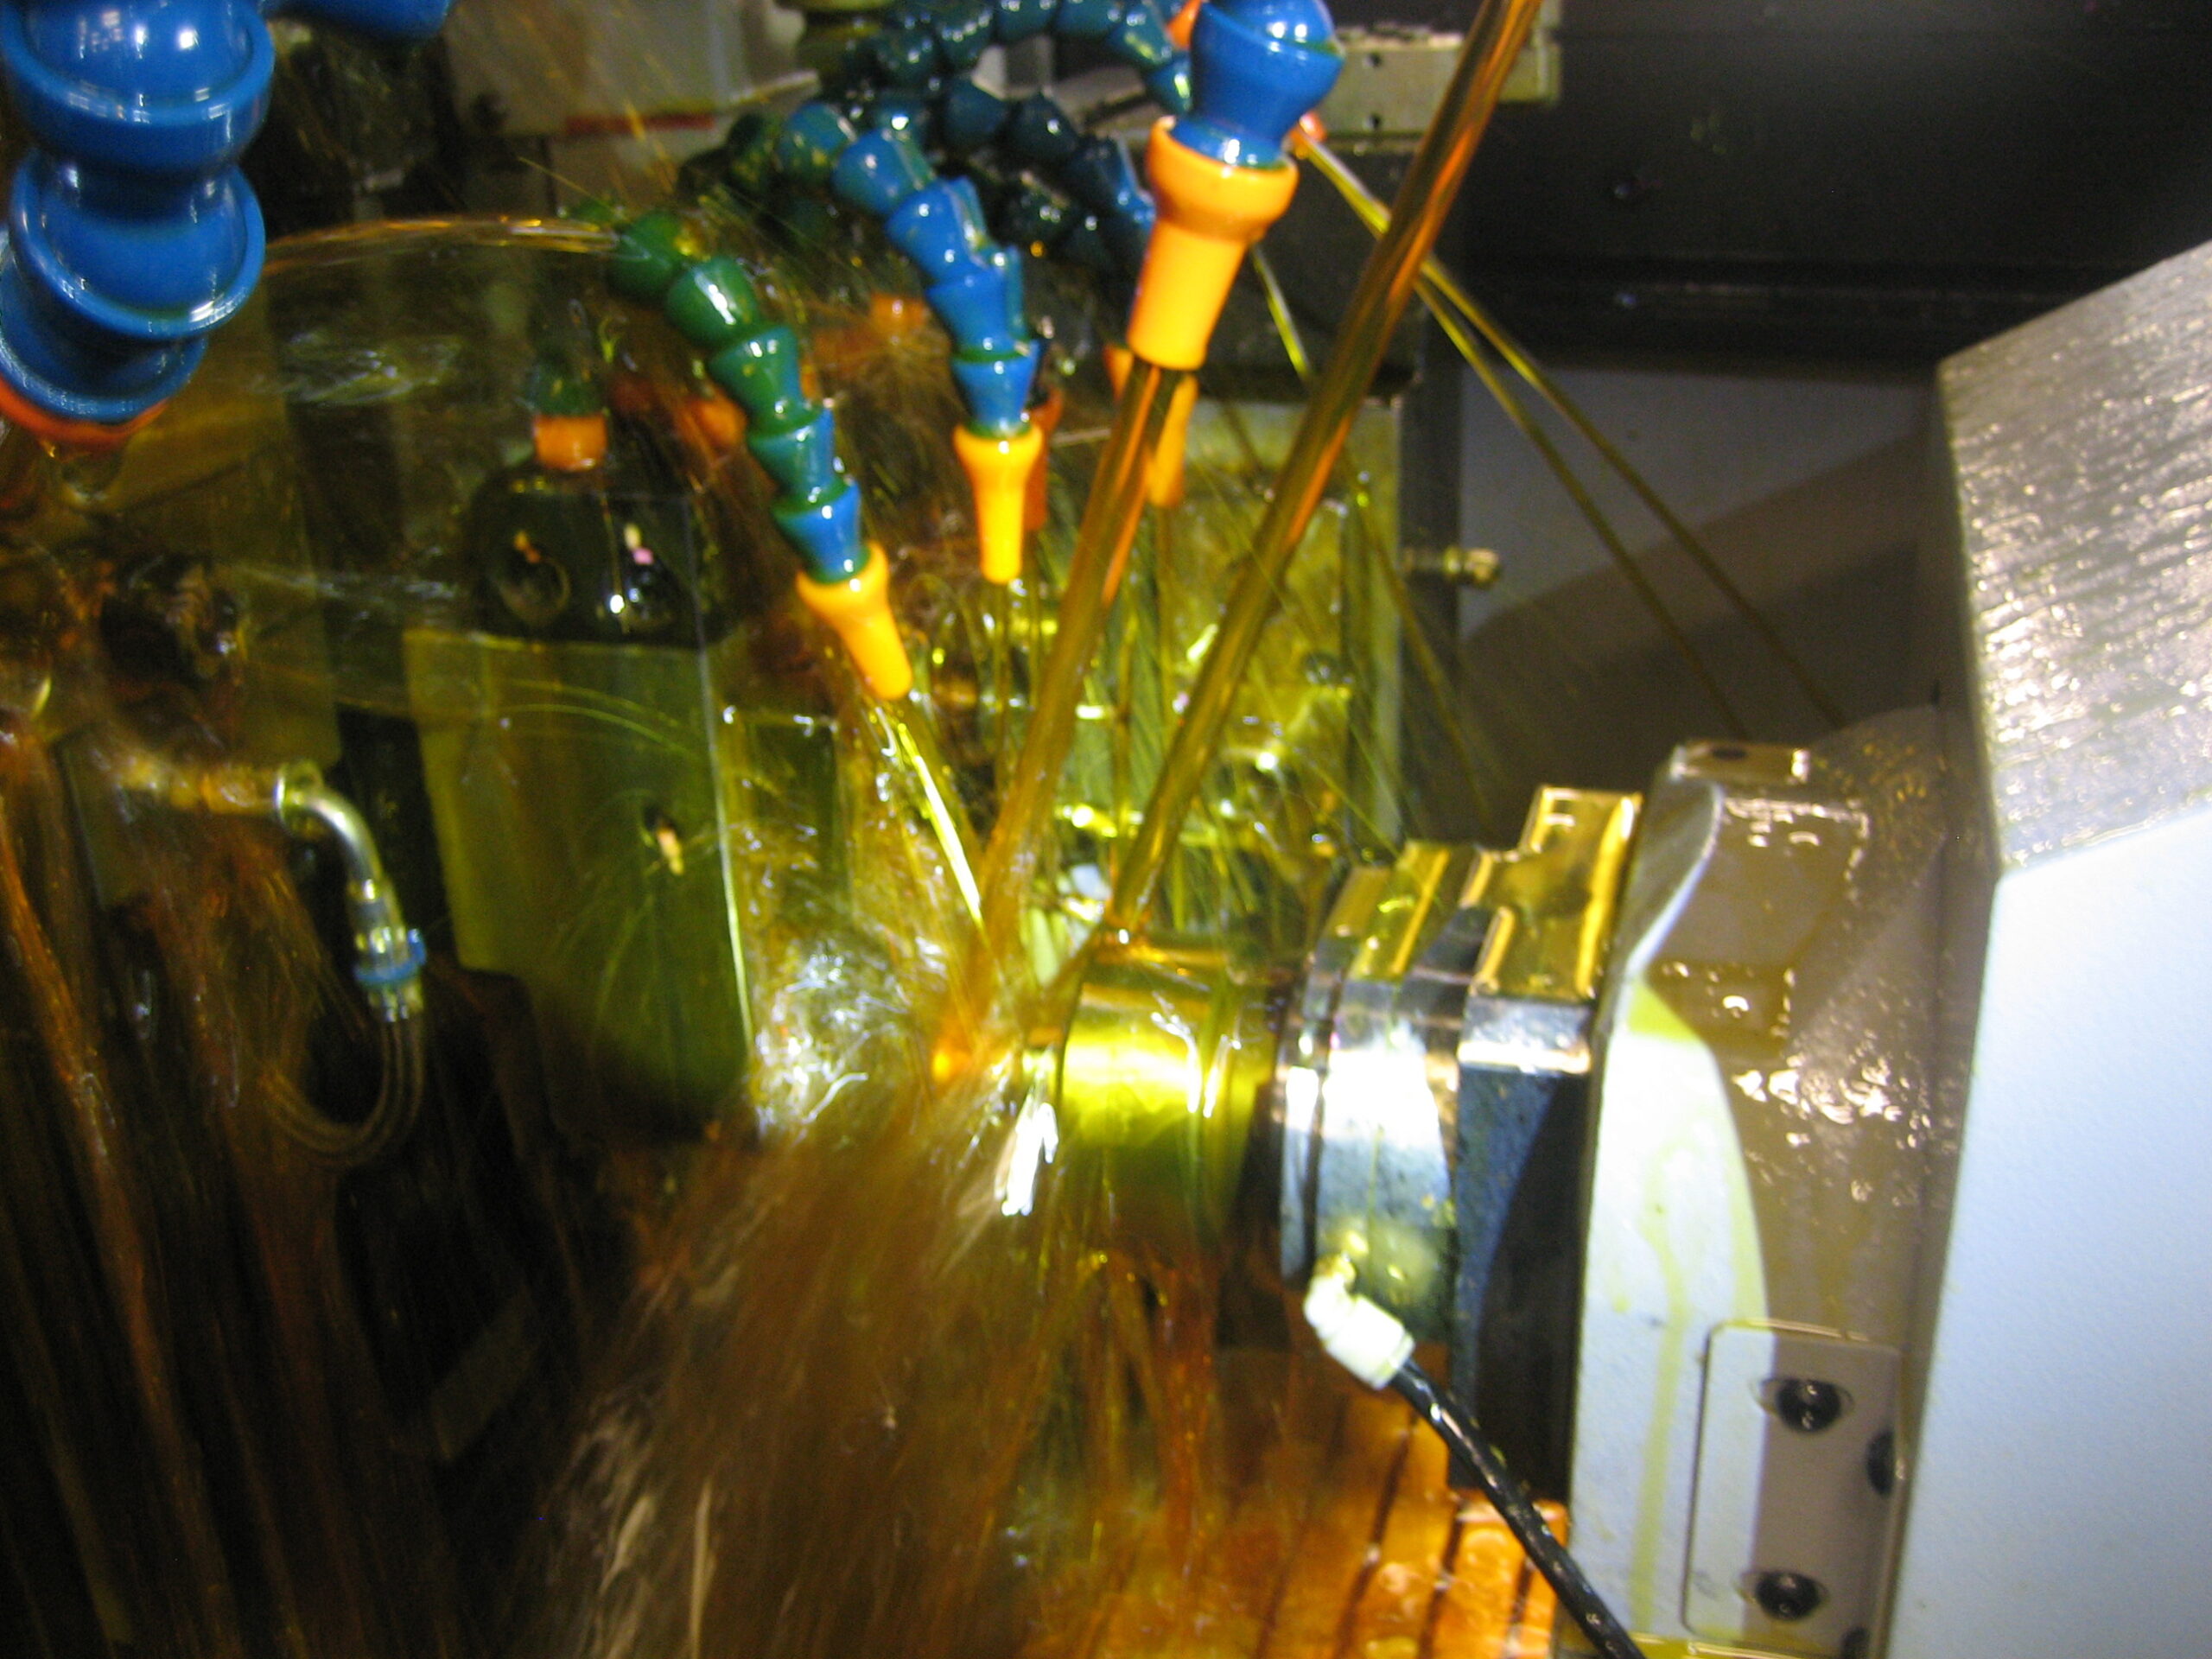 A dynamic industrial scene showing a metal component being cooled with a spray of liquid from multiple nozzles during a machining process.